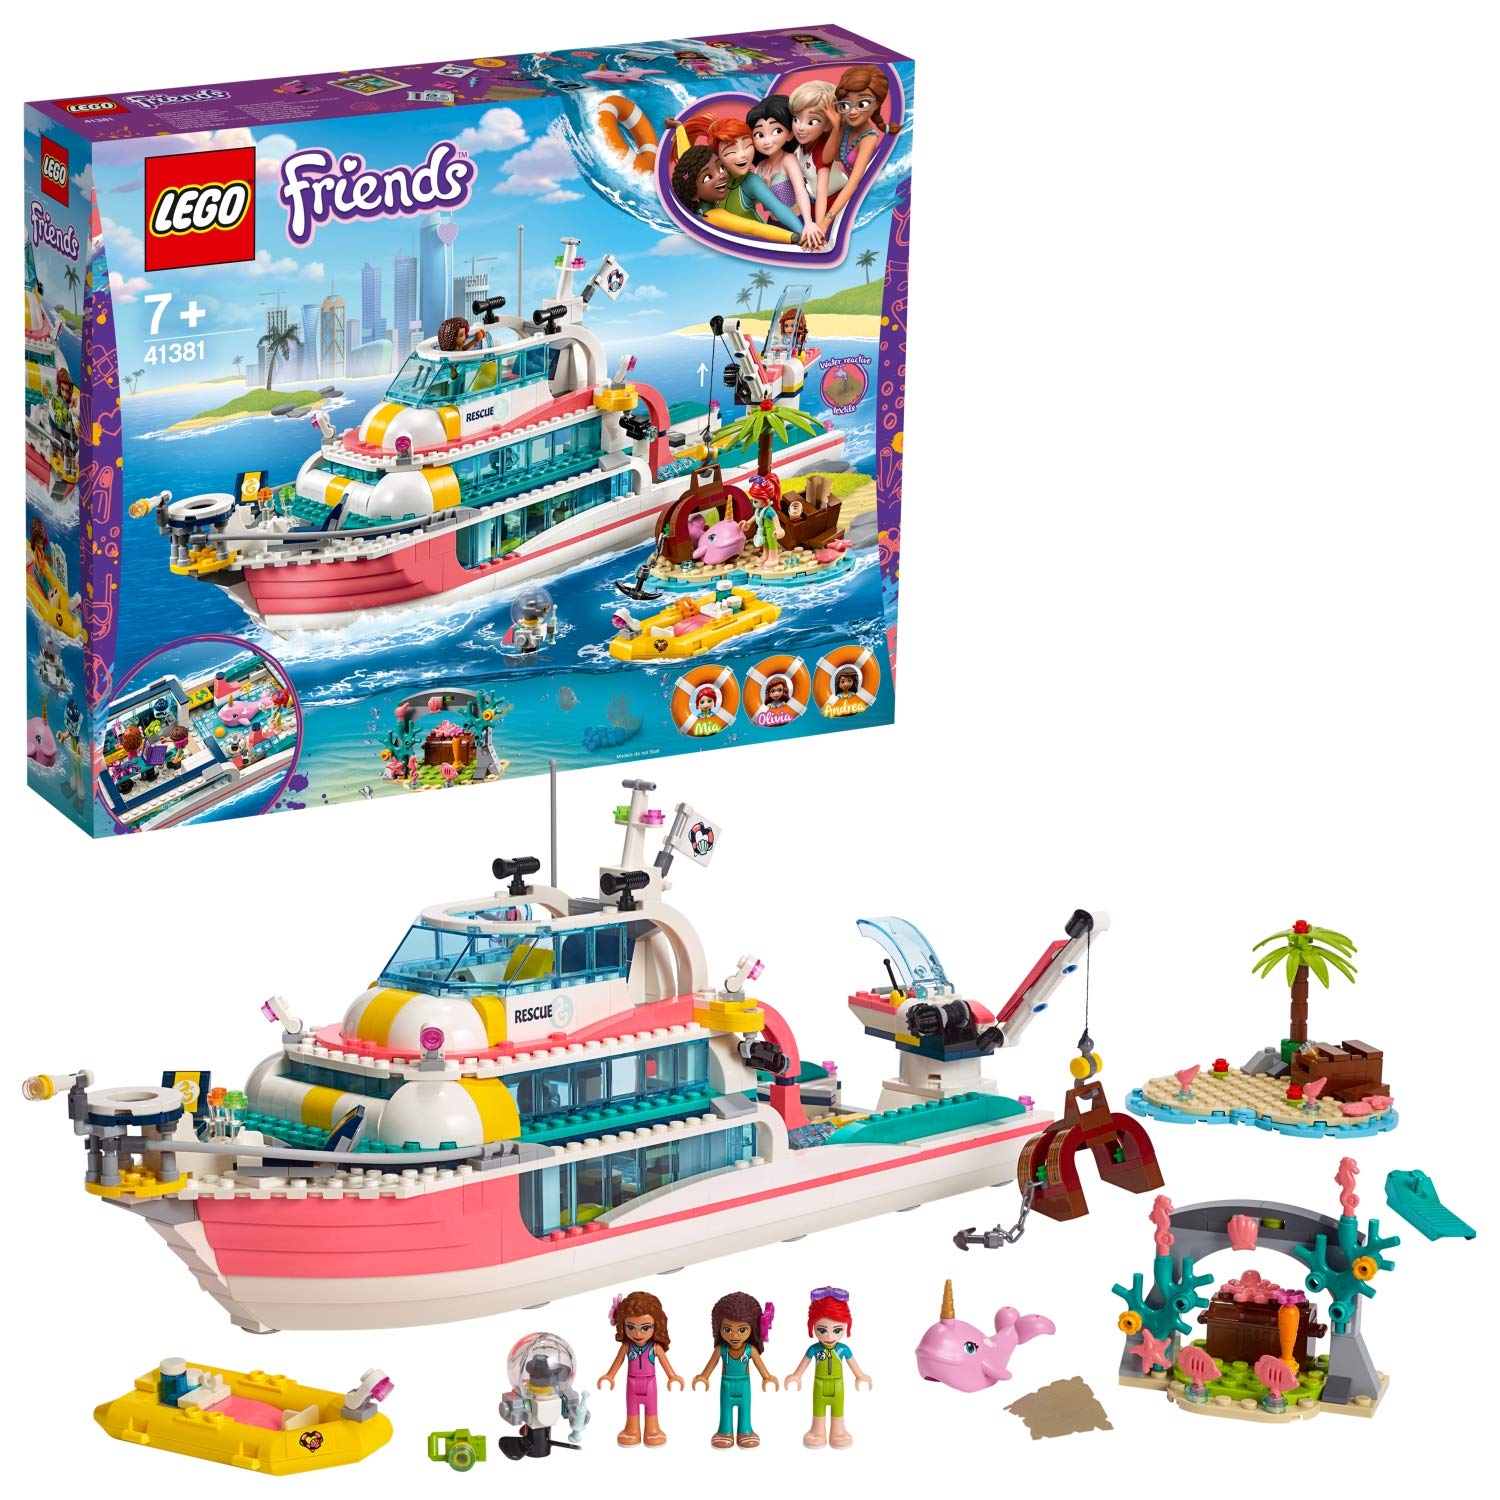 Lego 41381 - Friends Boat For Rescue Operations, Building Set